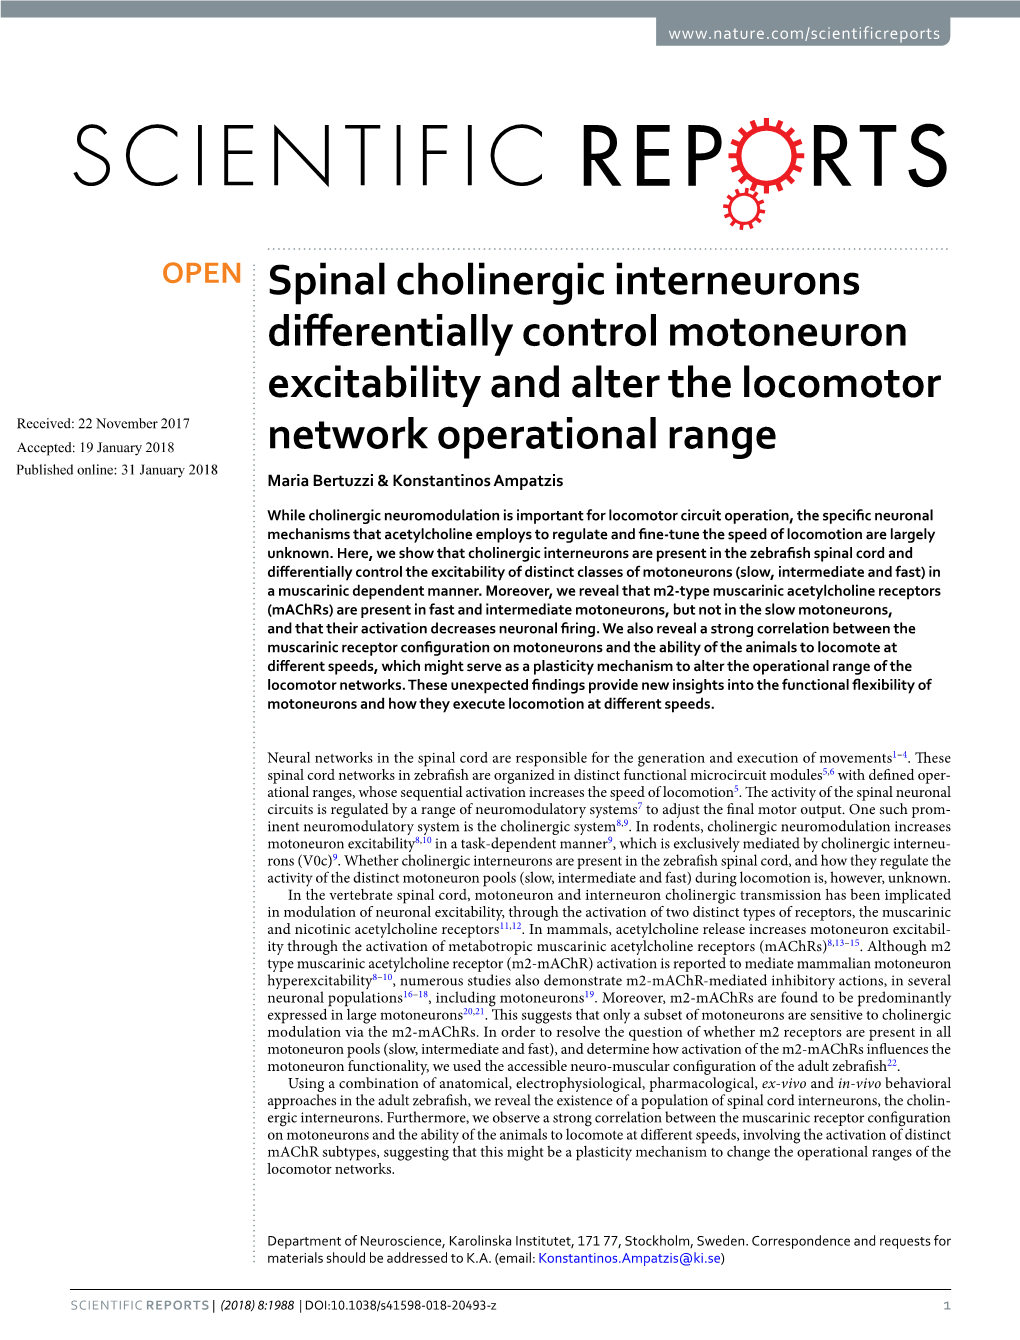 Spinal Cholinergic Interneurons Differentially Control Motoneuron